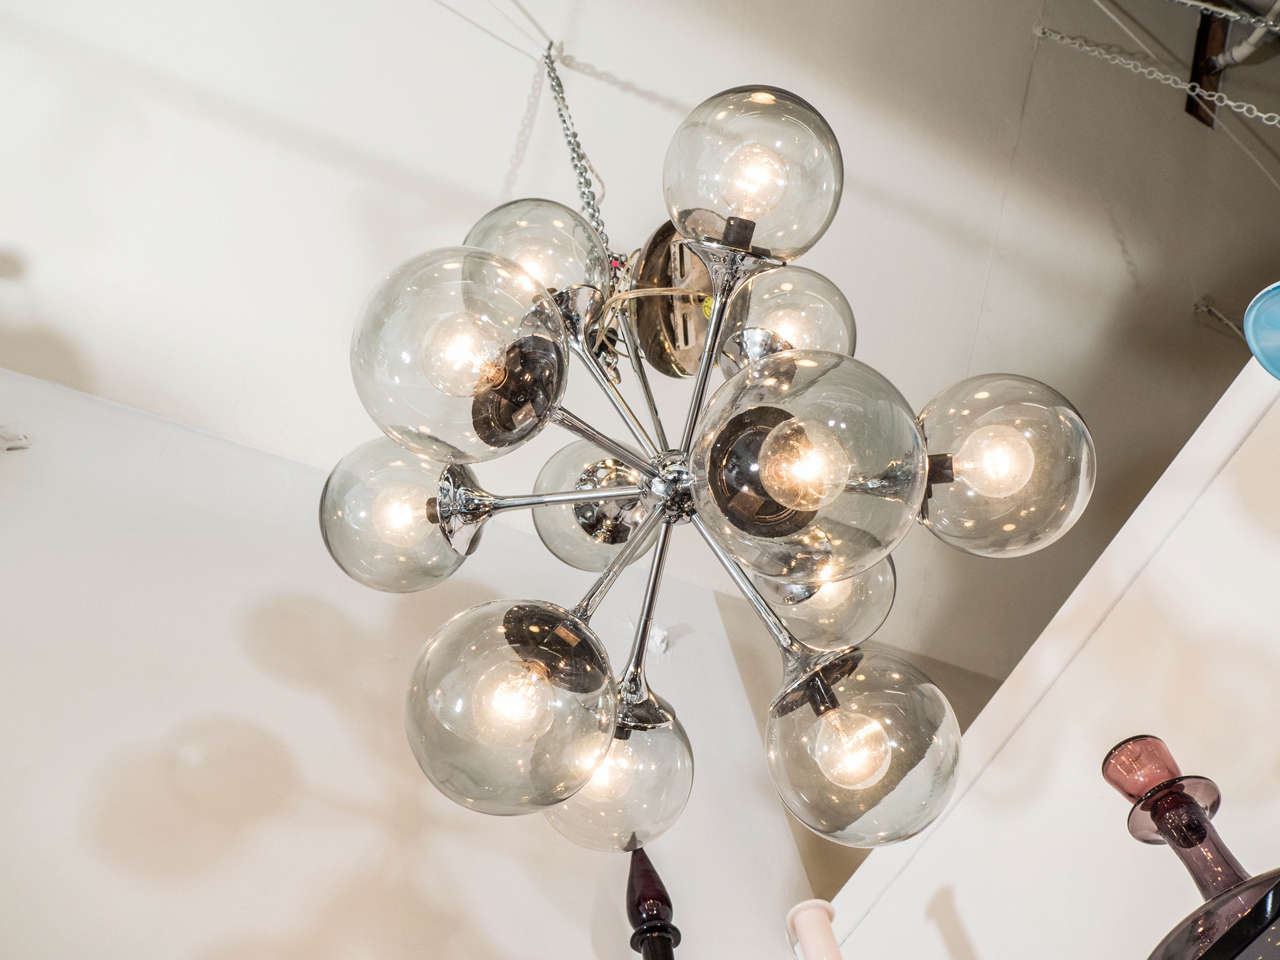 American Midcentury Chrome and Smoked Bubble Glass Sputnik Chandelier by Lightolier